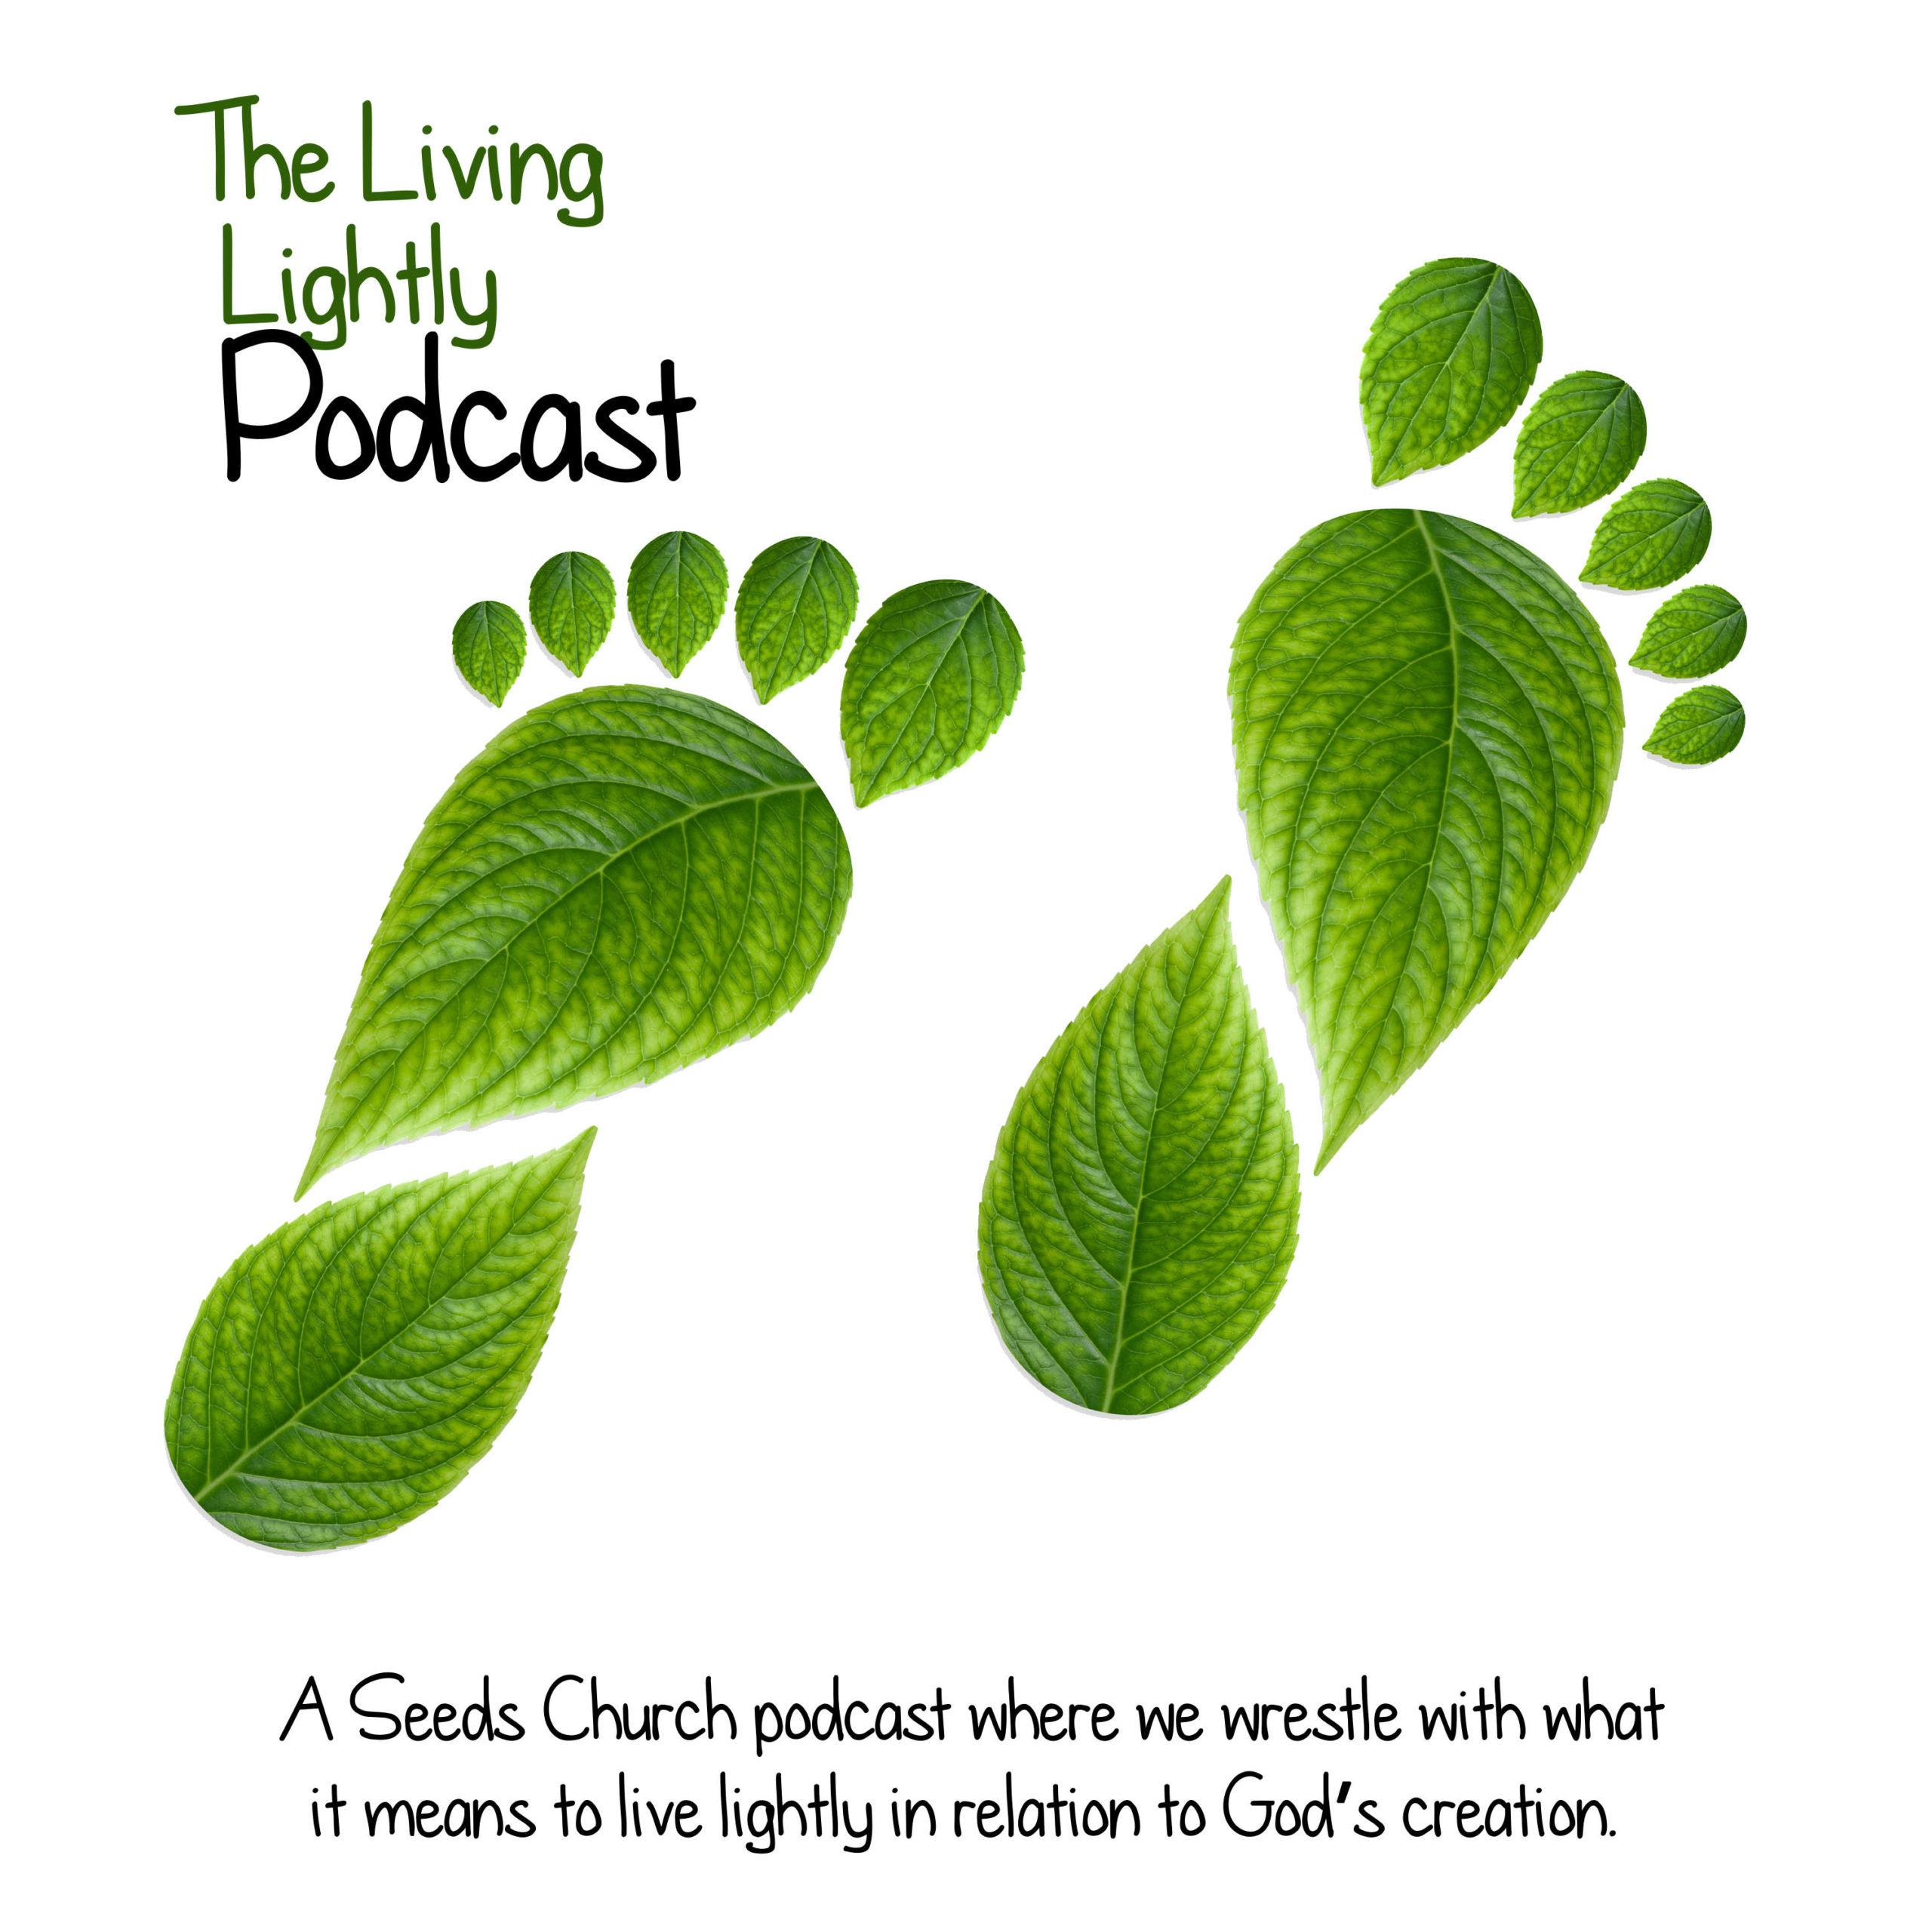 The Living Lightly Podcast